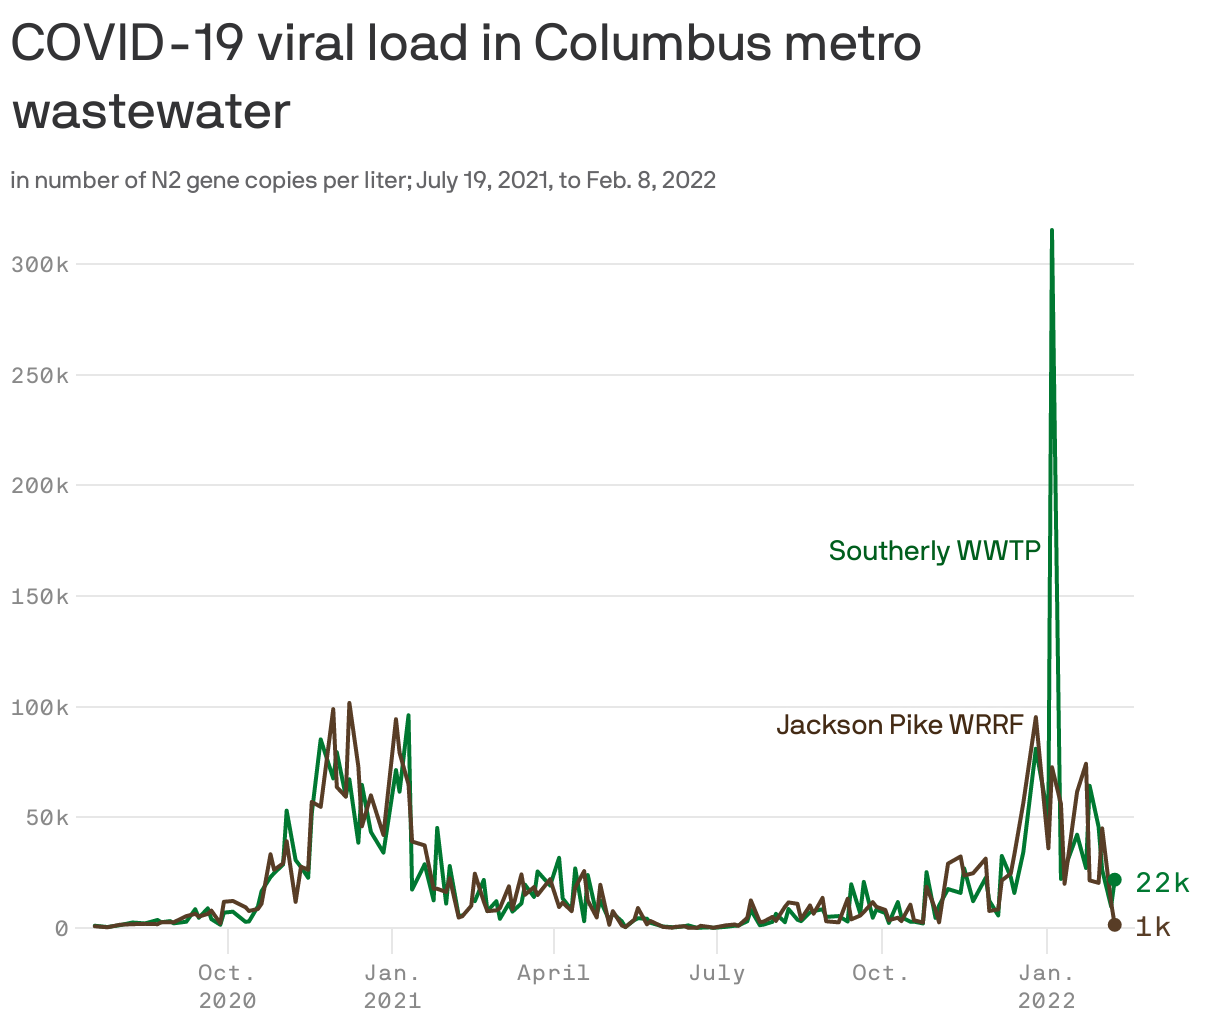 COVID-19 viral load in Columbus metro wastewater